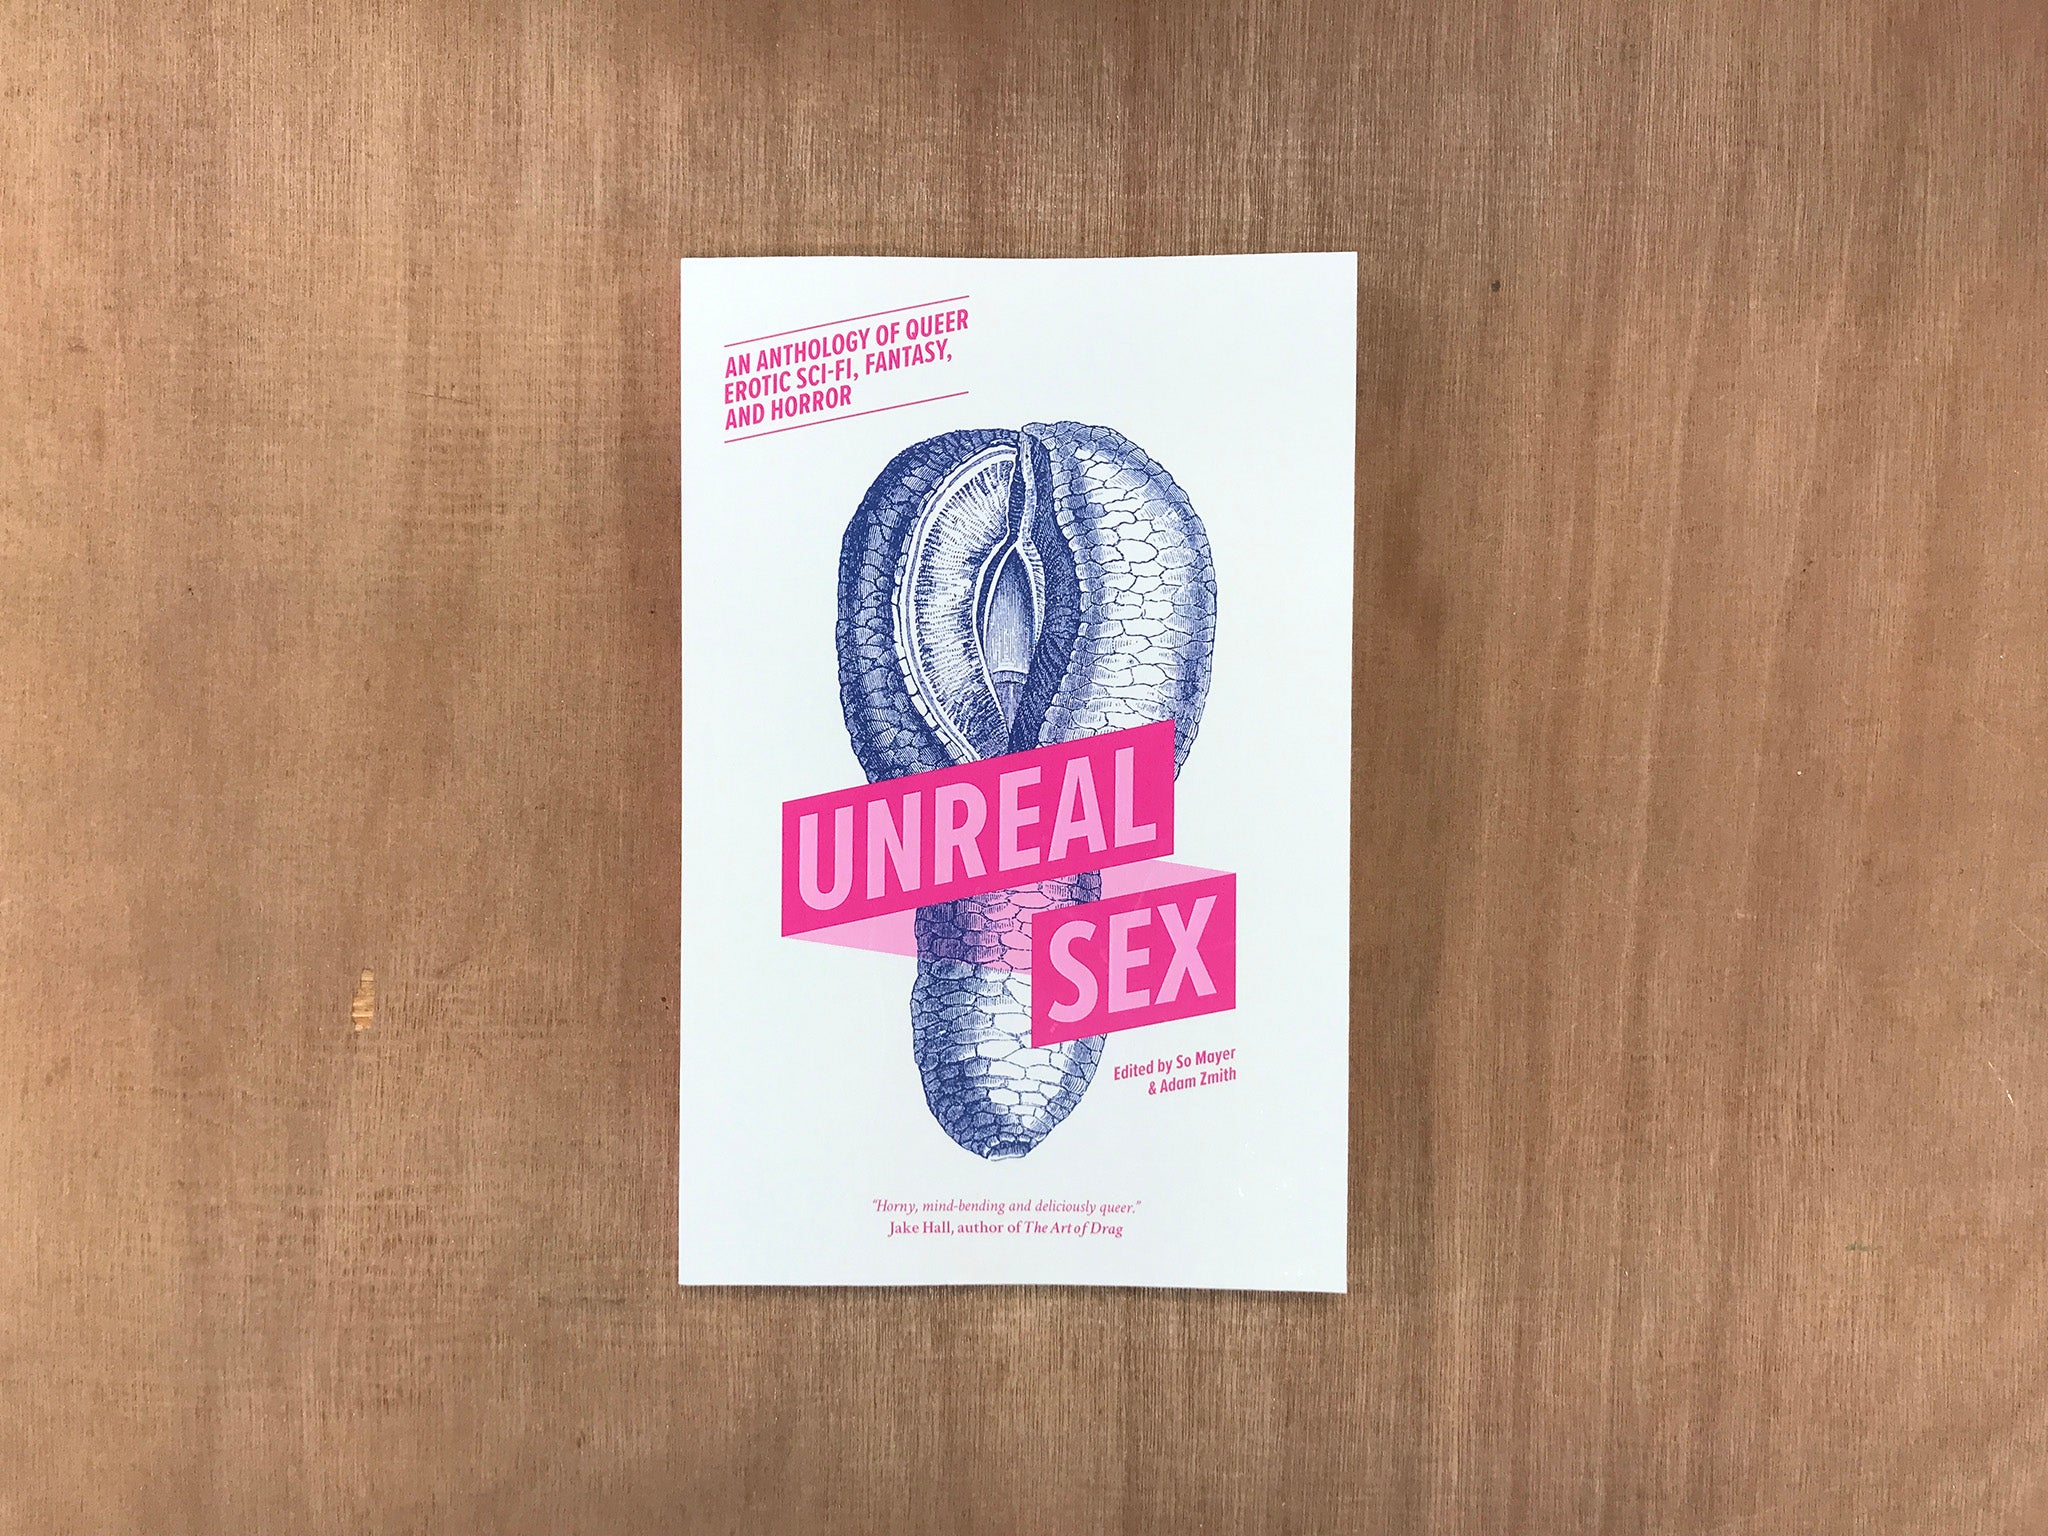 UNREAL SEX: AN ANTHOLOGY OF QUEER EROTIC SCI-FI, FANTASY, AND HORROR Edited by So Mayer & Adam Zmith